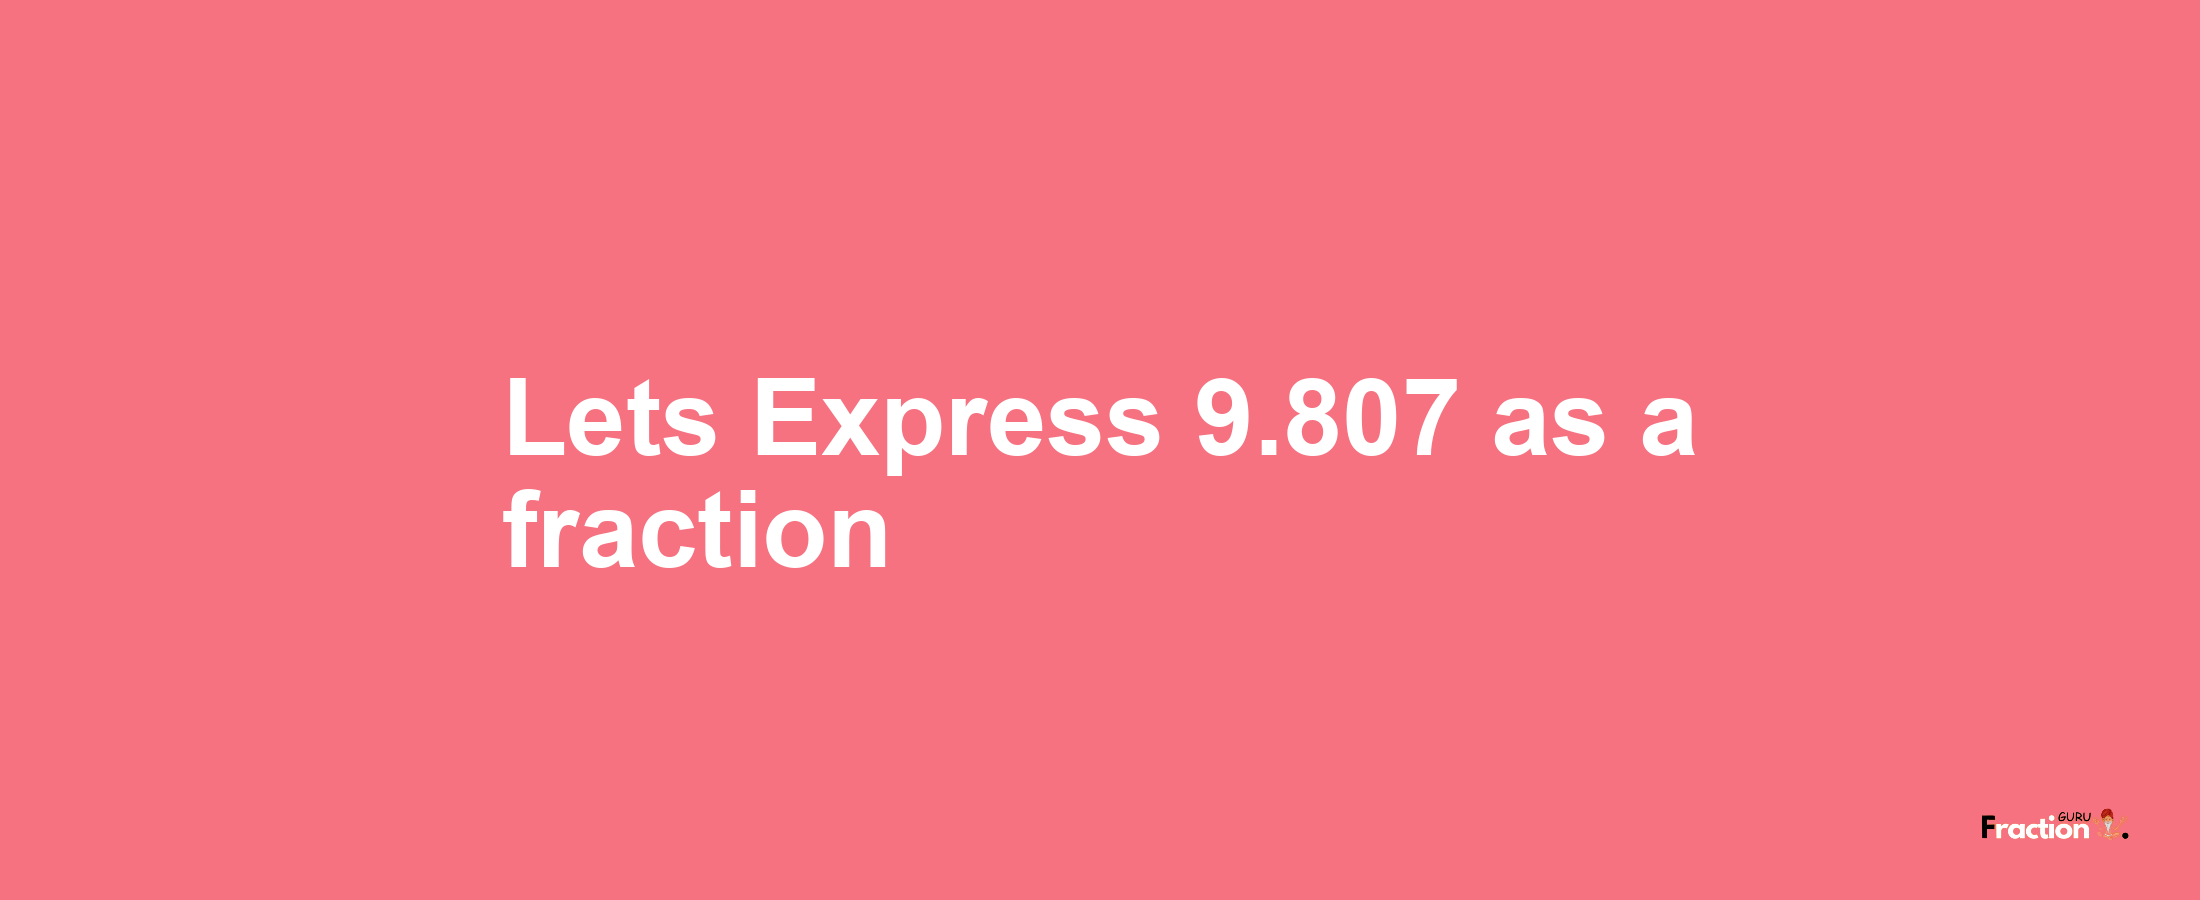 Lets Express 9.807 as afraction